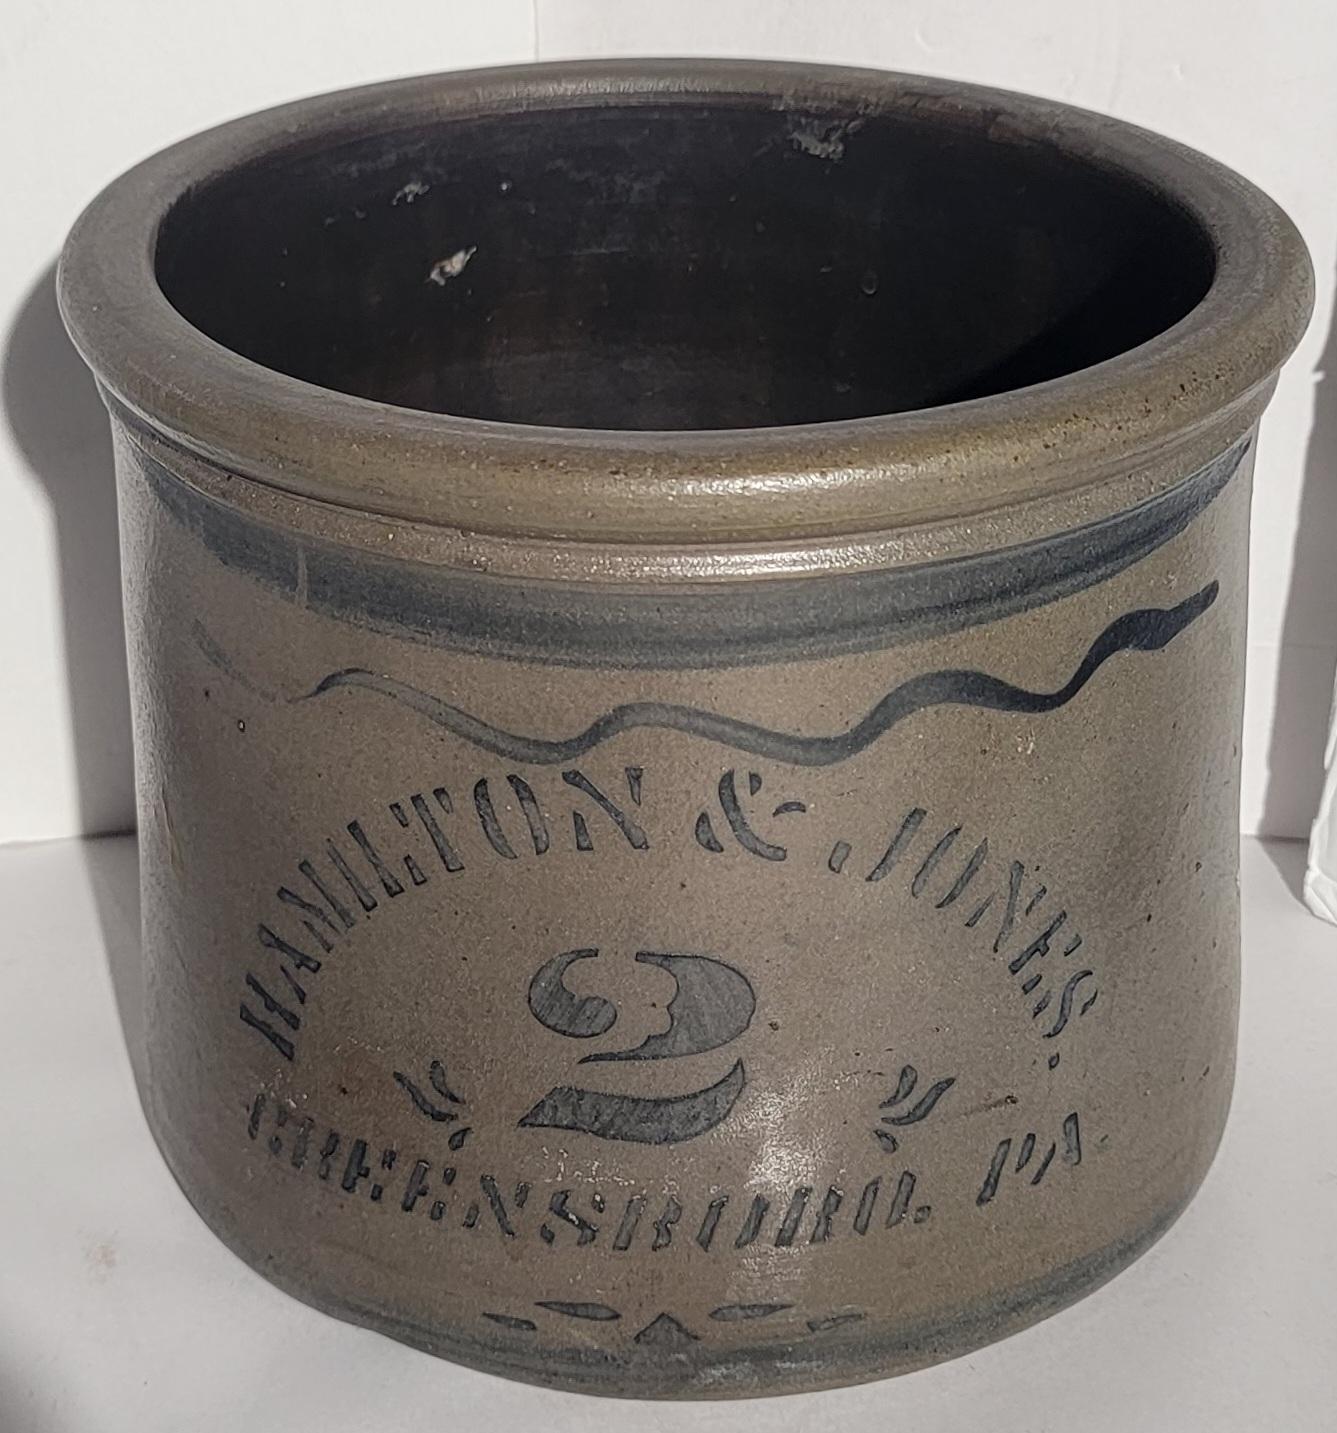 This fine country crock is decorated & Signed Hamilton & Jones Greensboro,Pa. and has a big 2 on the front.This two gallon crock has blue decoration & could be a cake or butter crock.The condition is mint.